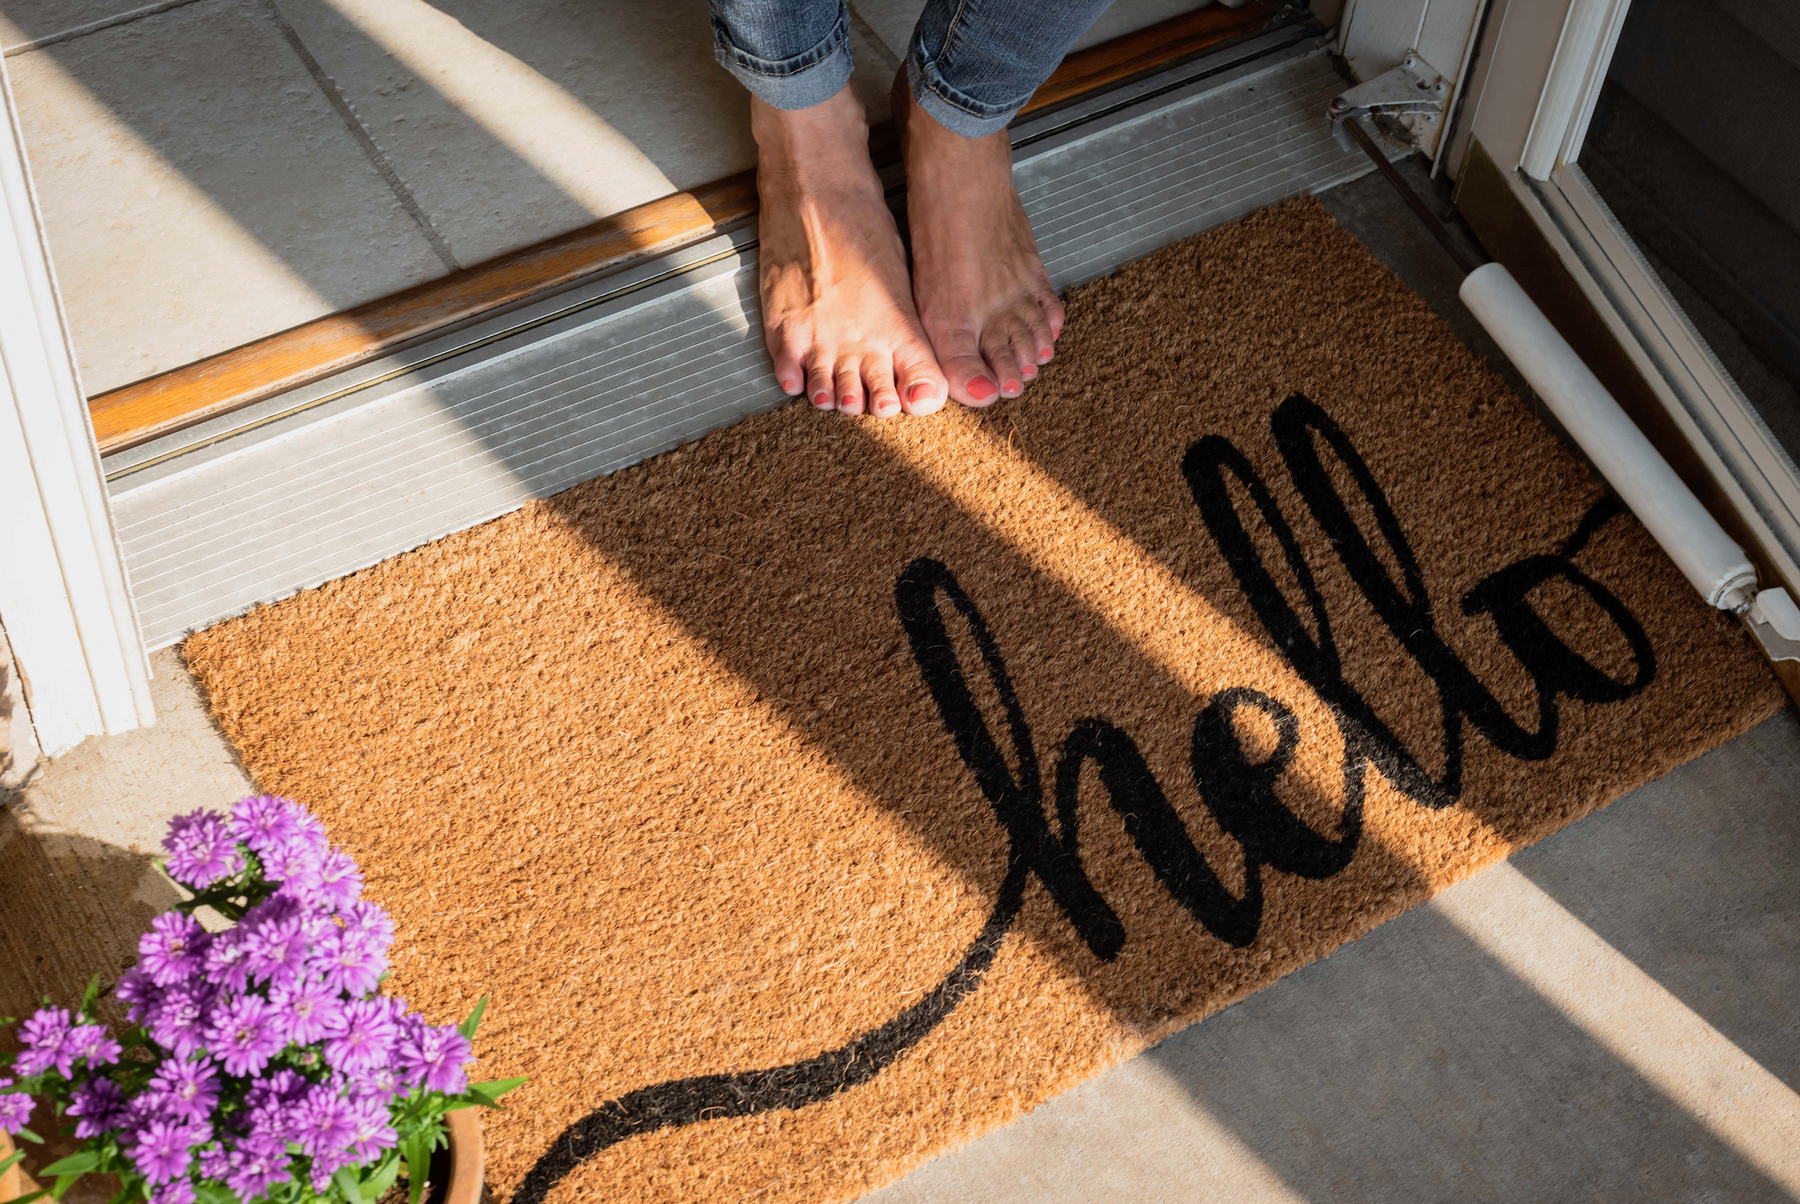 Simple Tips to Say “Welcome Home”